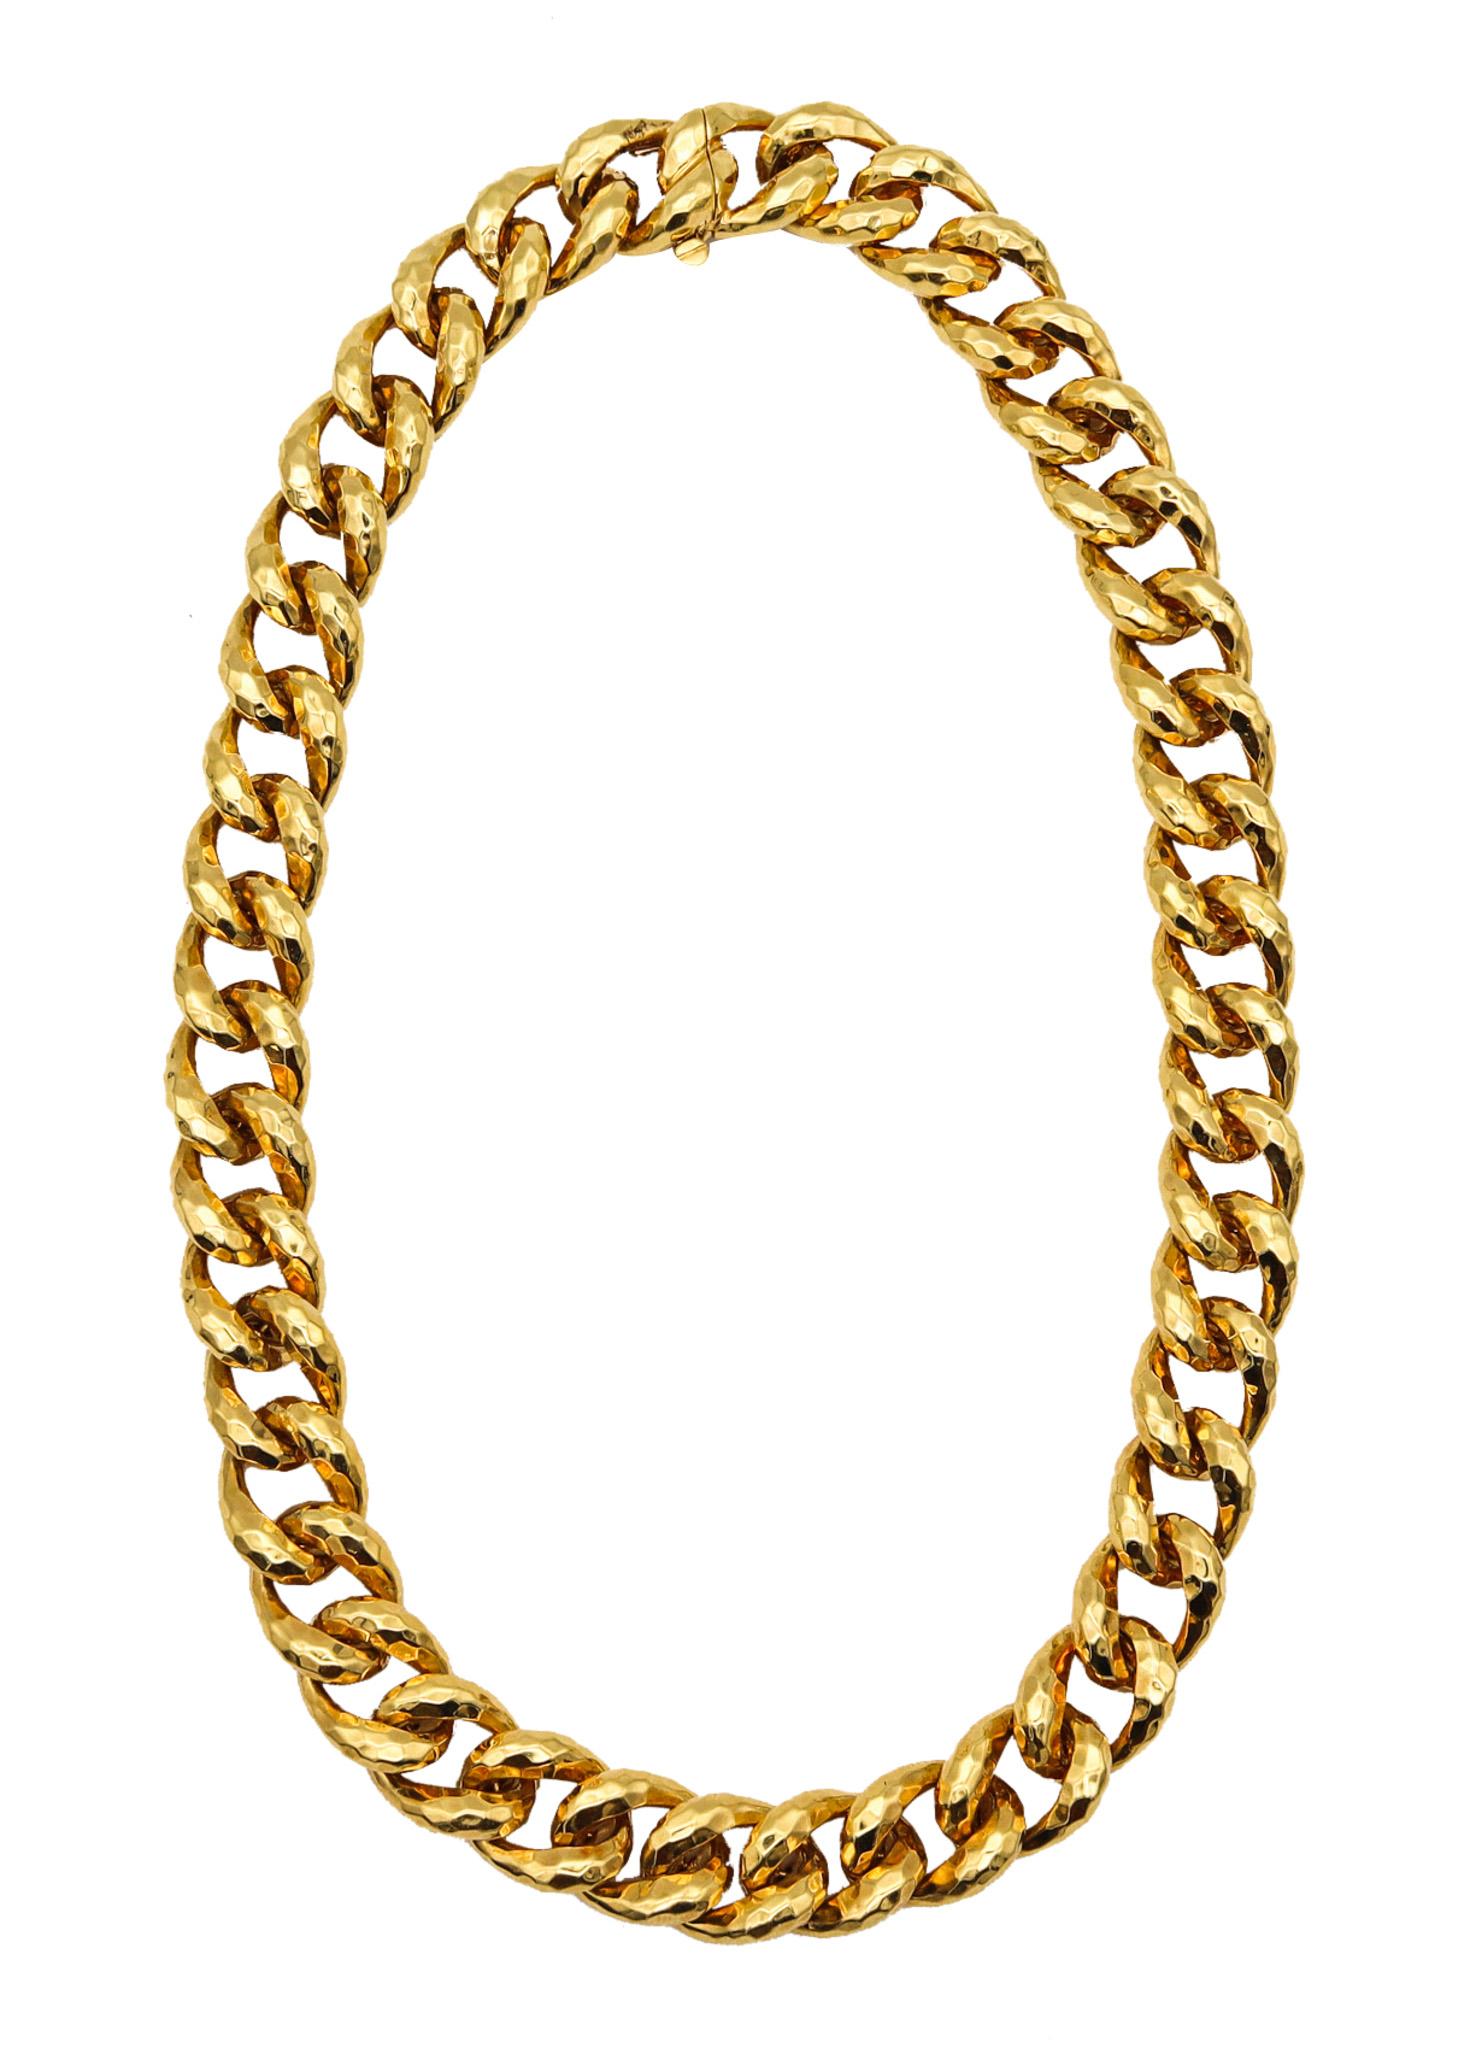 Links necklace designed by Henry Dunay.

Gorgeous necklace, created in New York city at the jewelry atelier of Henry Dunay, back in the late 20th century. This necklace has been crafted with multiples faceted links, made up in solid yellow gold of